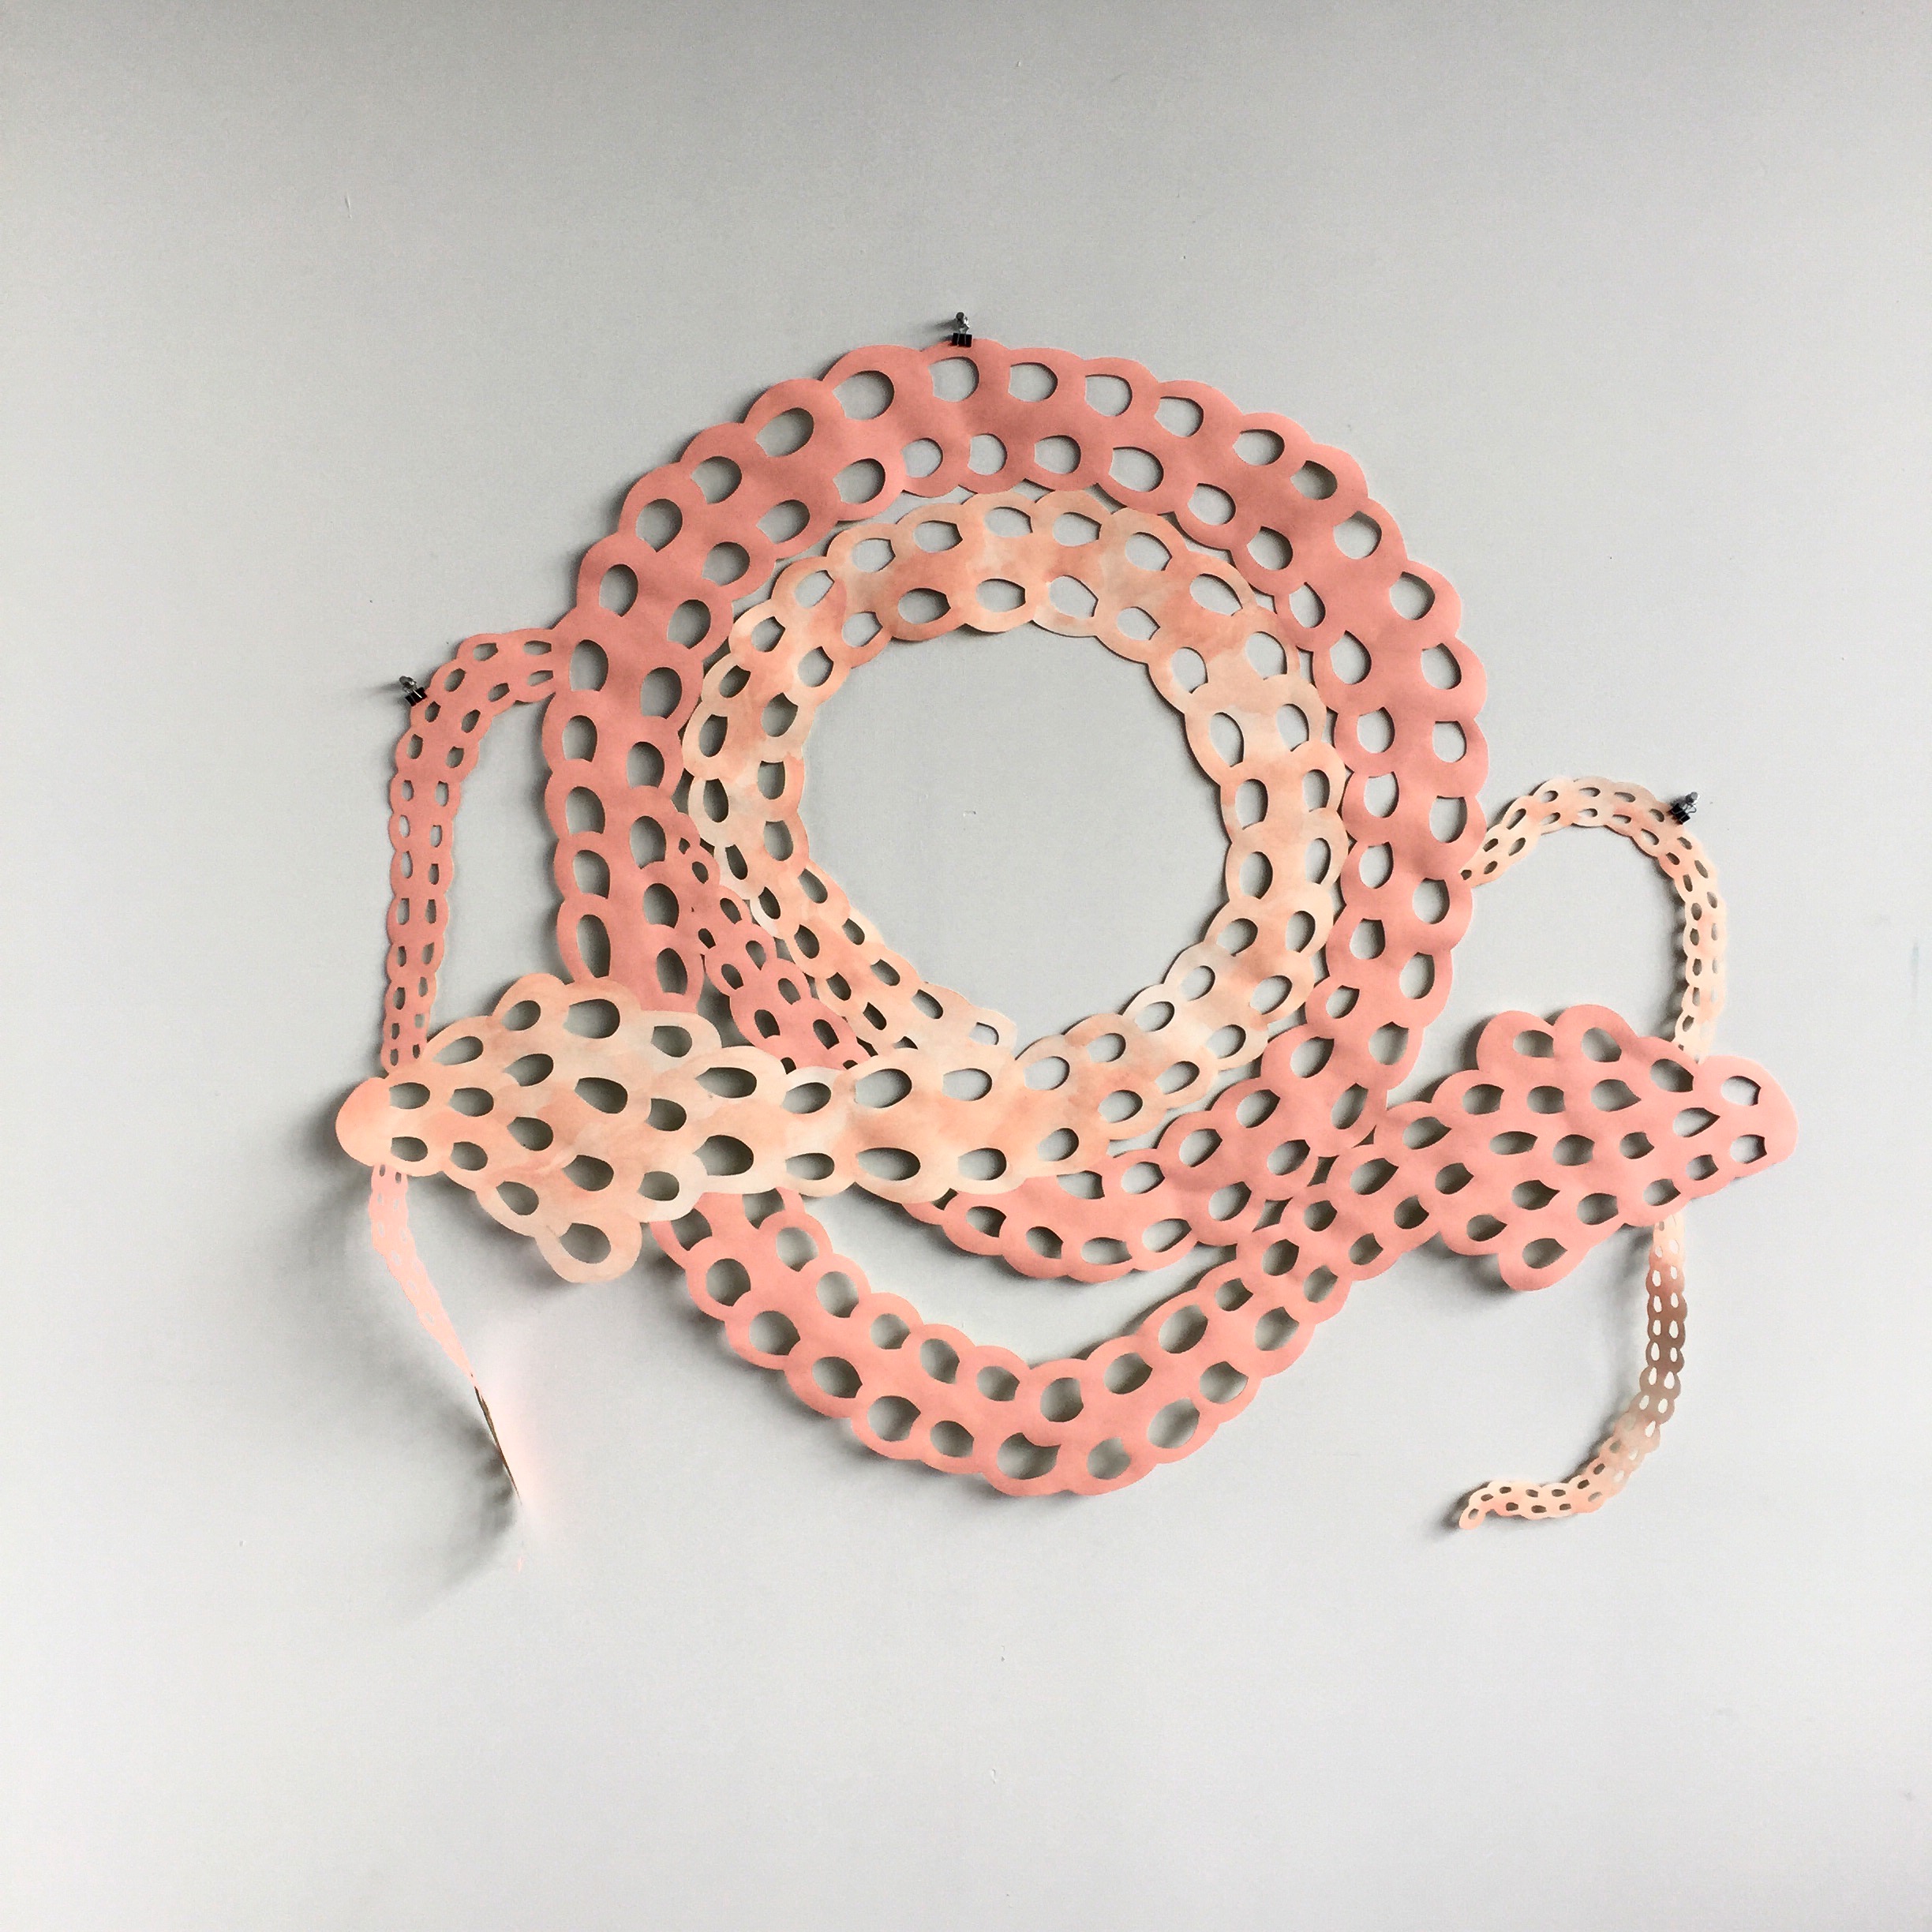 Chained Snakes, 2018, acrylic and Flashe on cut paper, 40 x 48 inches